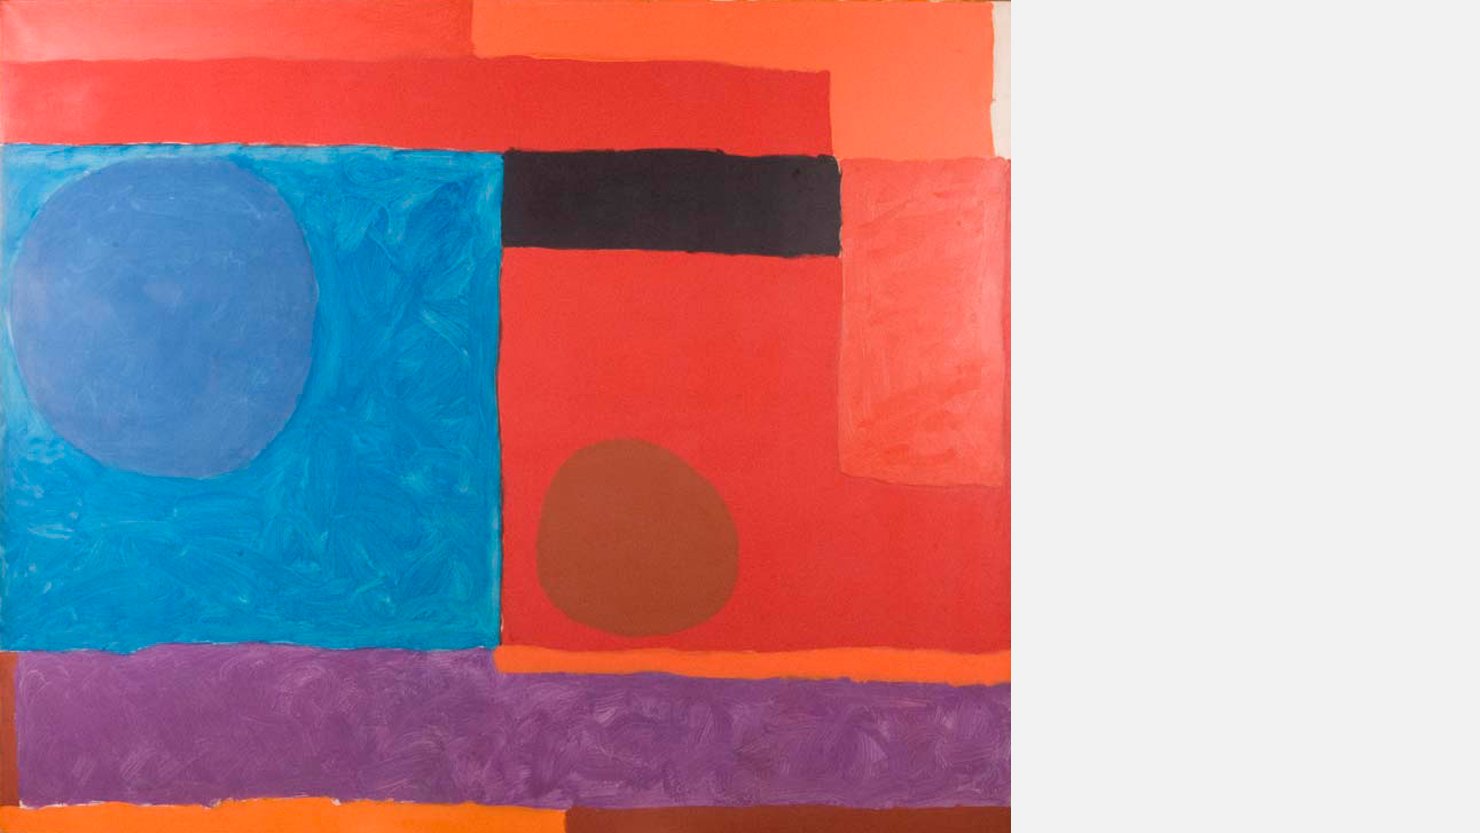 Rectilinear Reds and Blues, 1963 by Patrick Heron